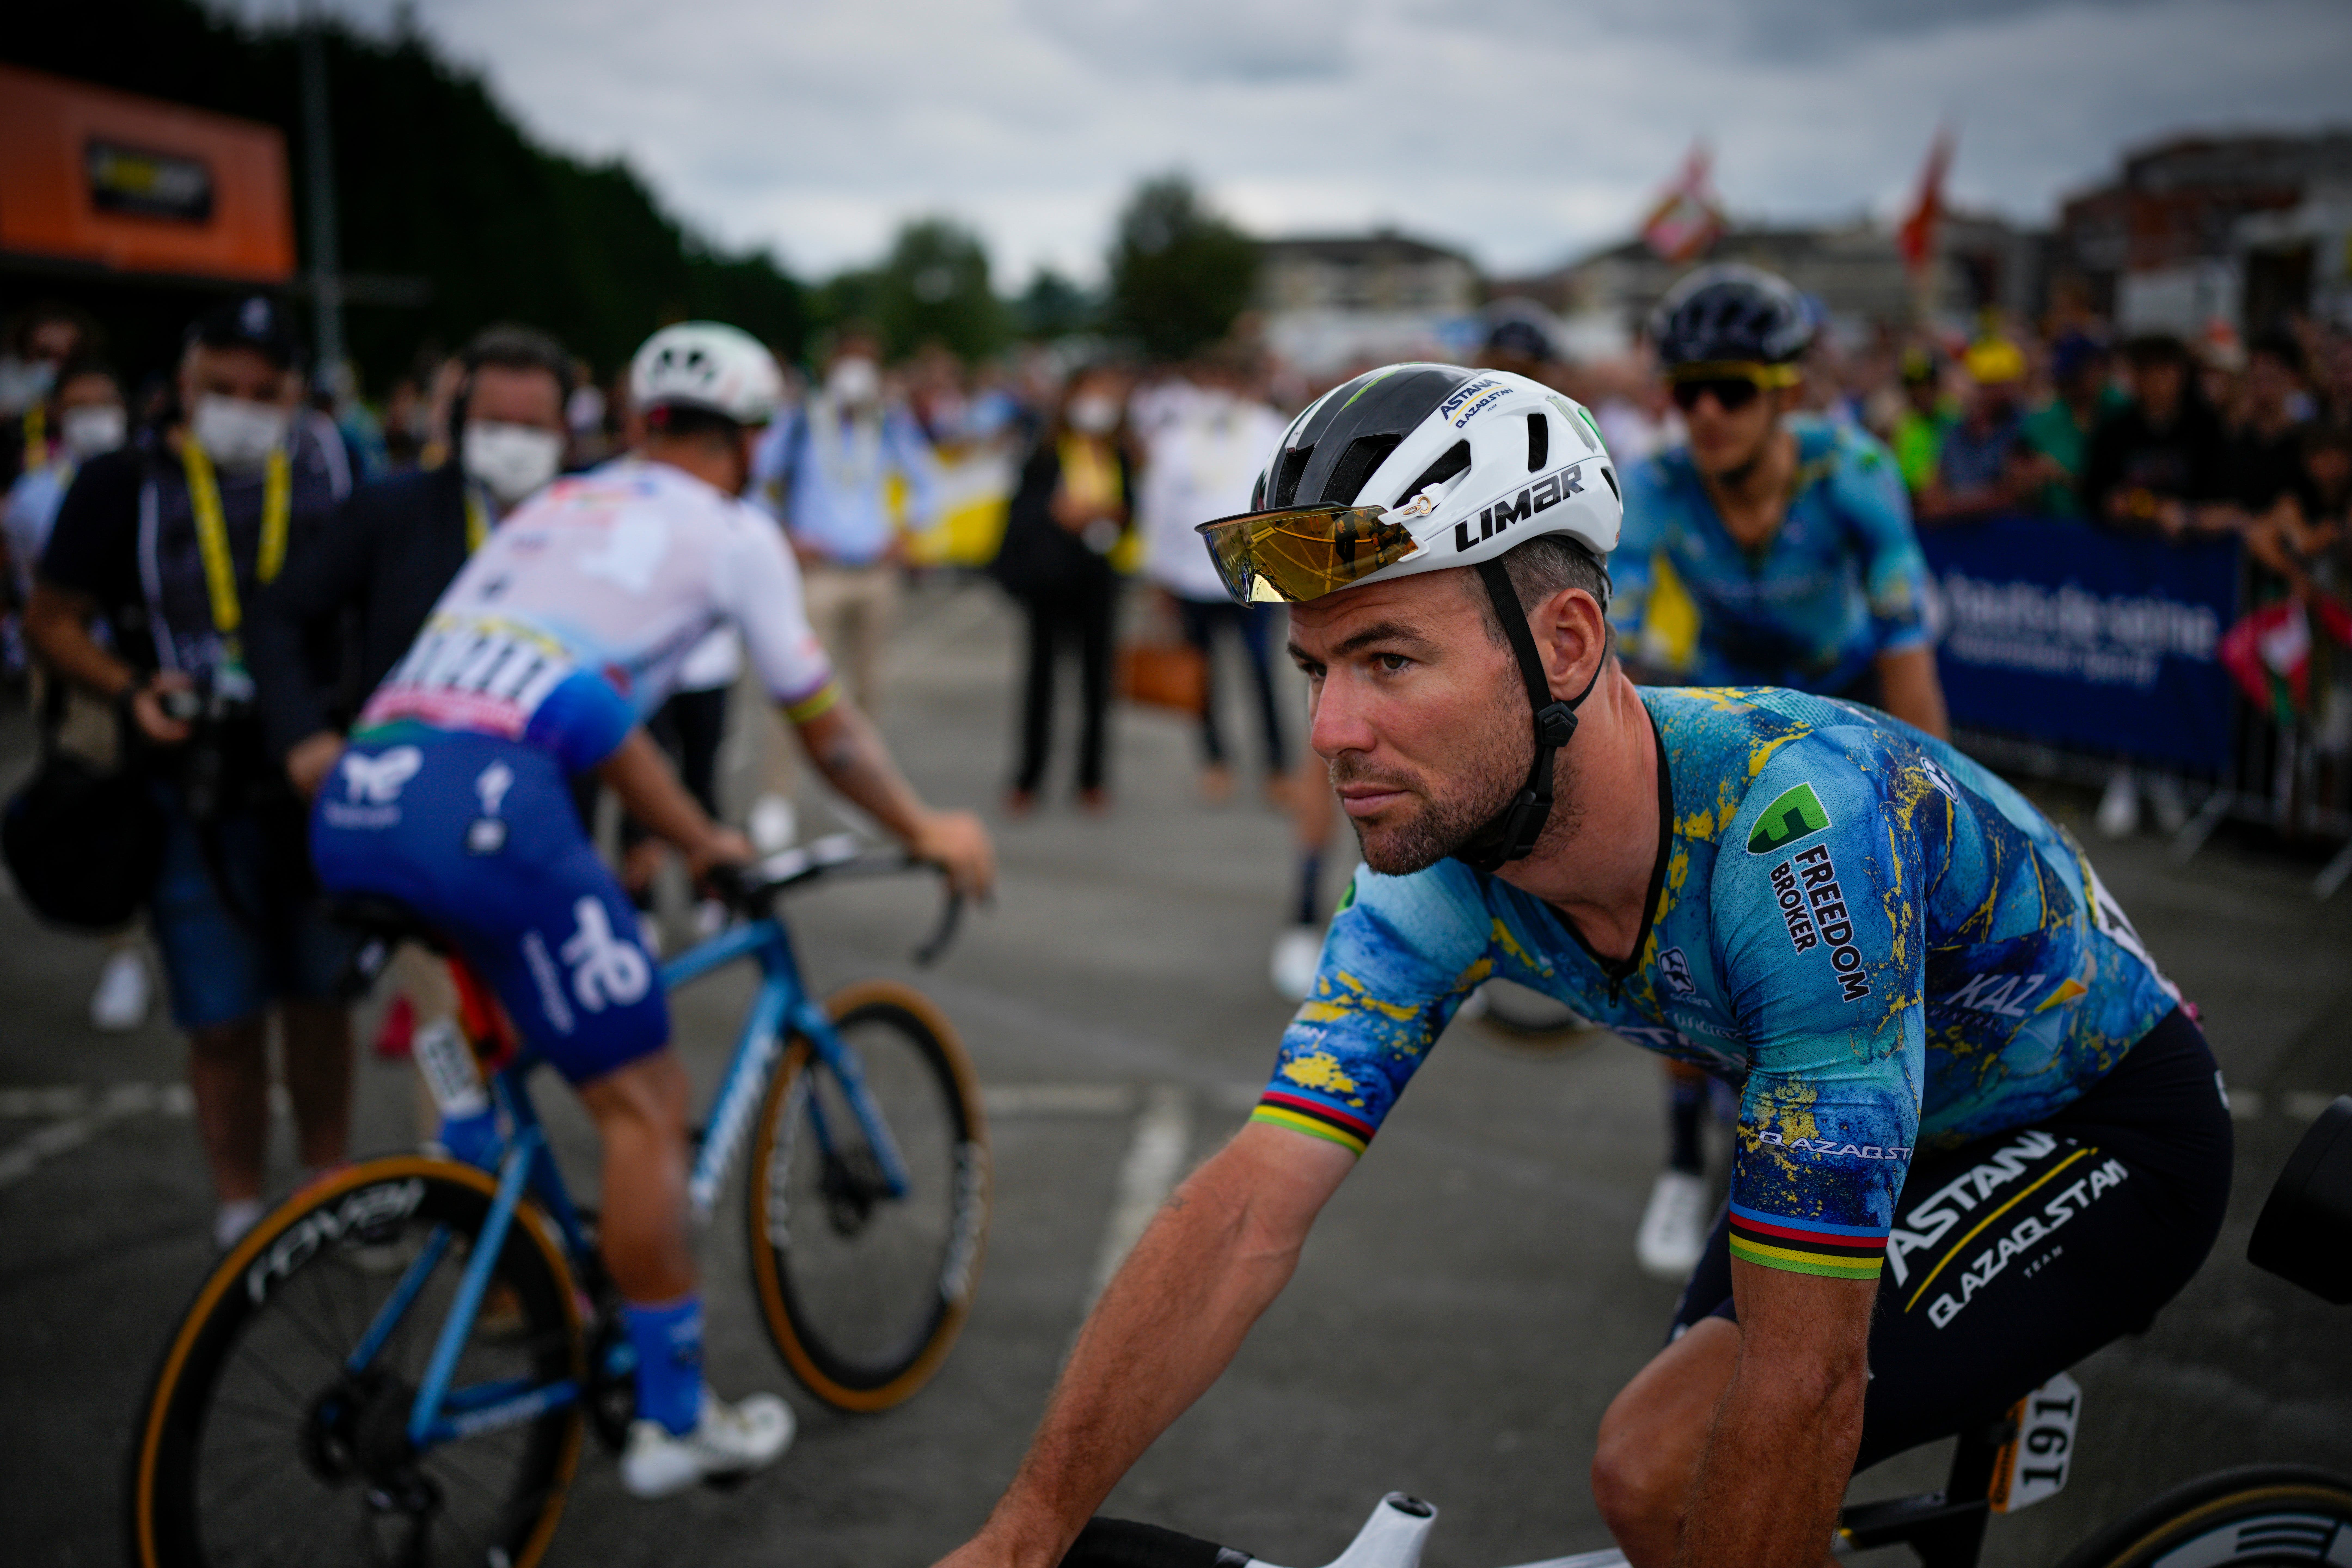 tour de france, tadej pogacar, jonas vingegaard, wout van aert, mark cavendish, remco evenepoel, primoz roglic, how to, tour de france fantasy guide and tips: how to score and the best riders to select